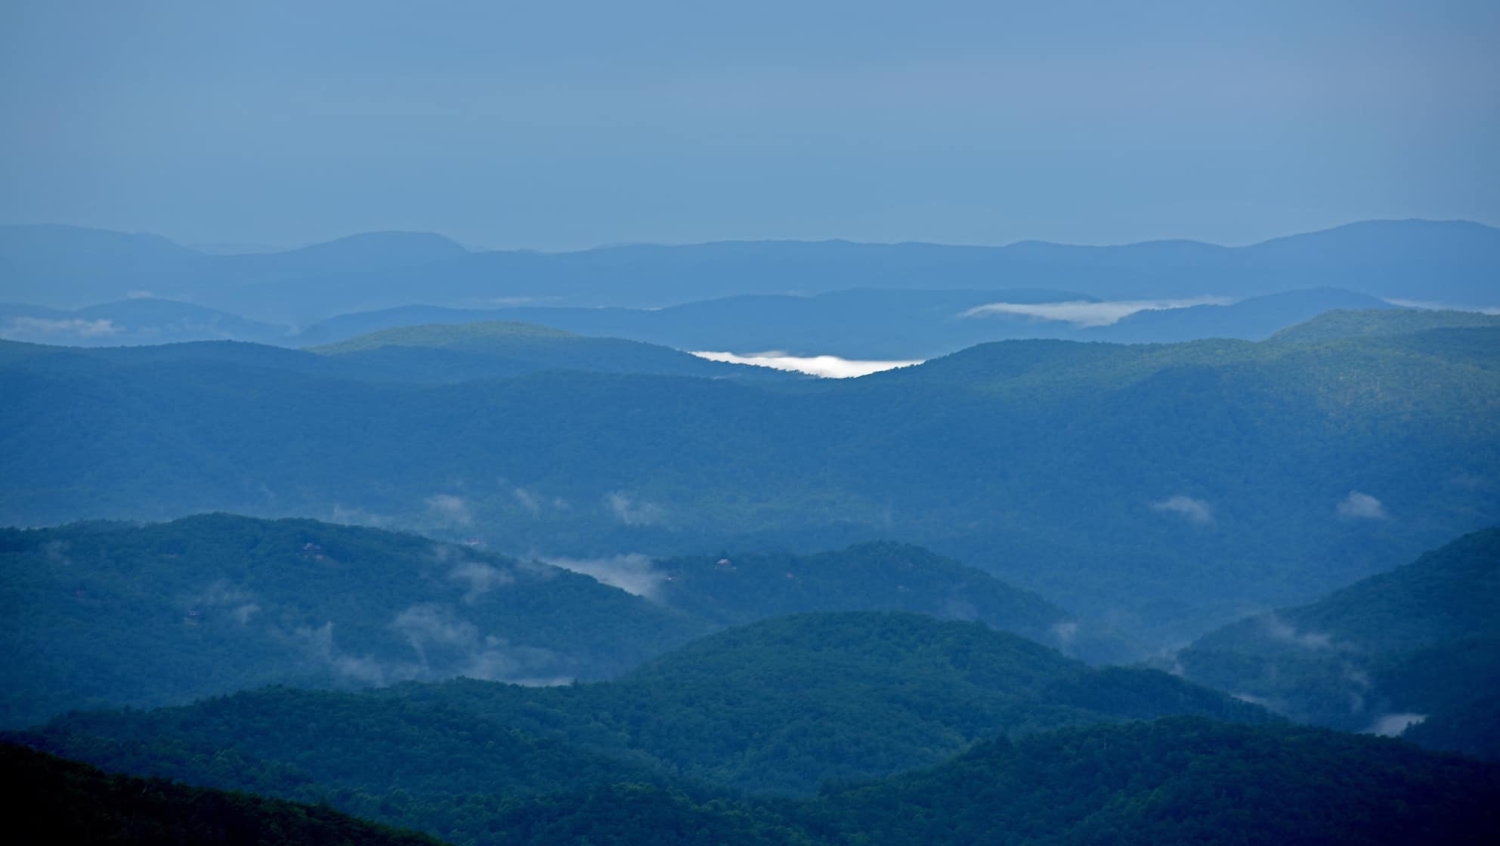 The view from Thunder Hill Overlook along the Blue Ridge Parkway in Watauga County.